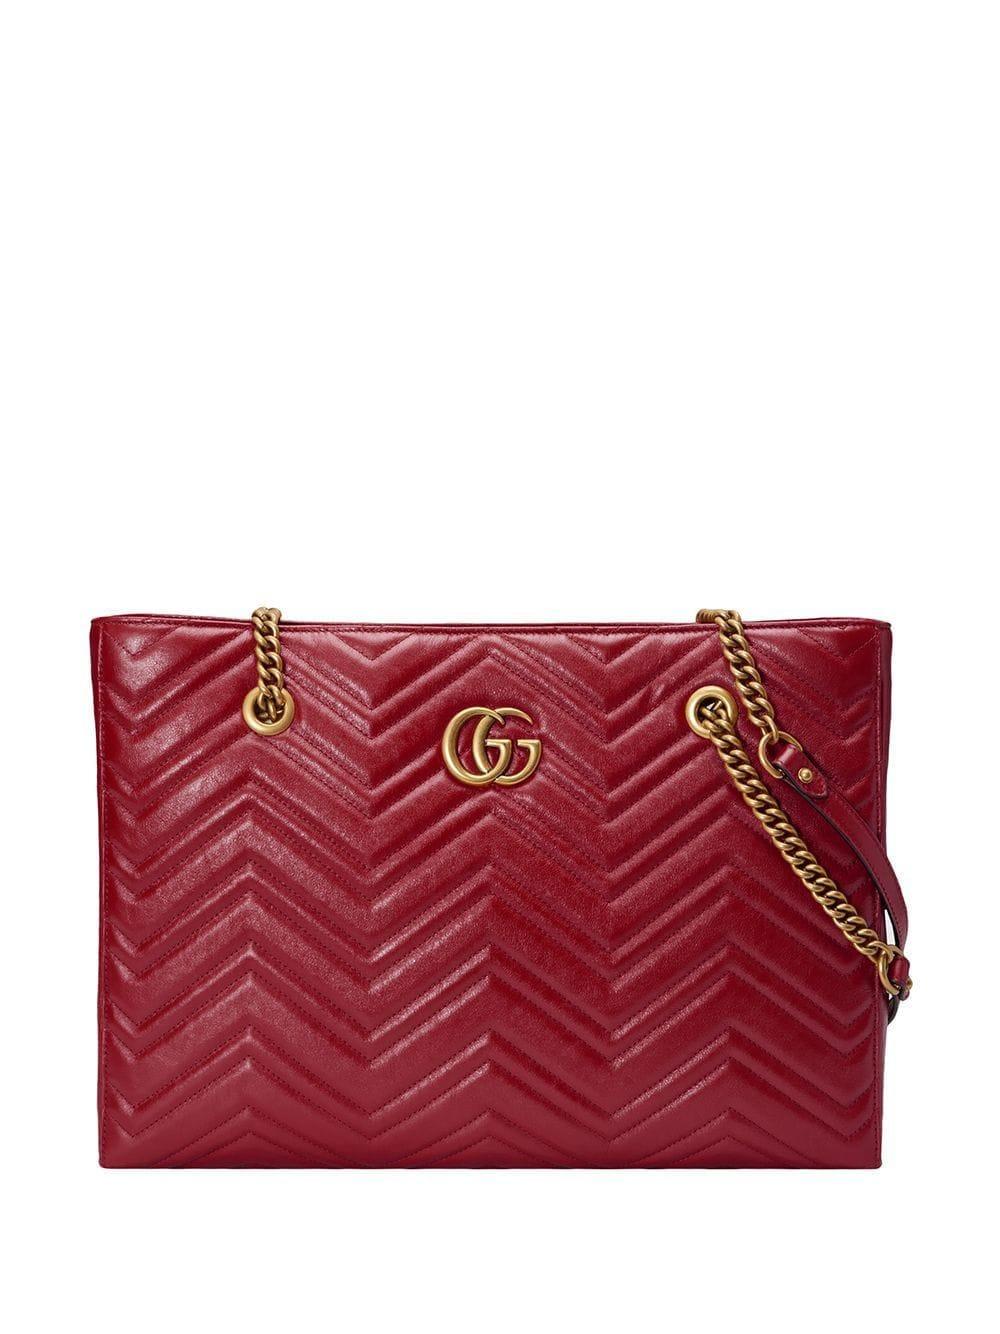 Gucci Leather GG Marmont Tote in Red -